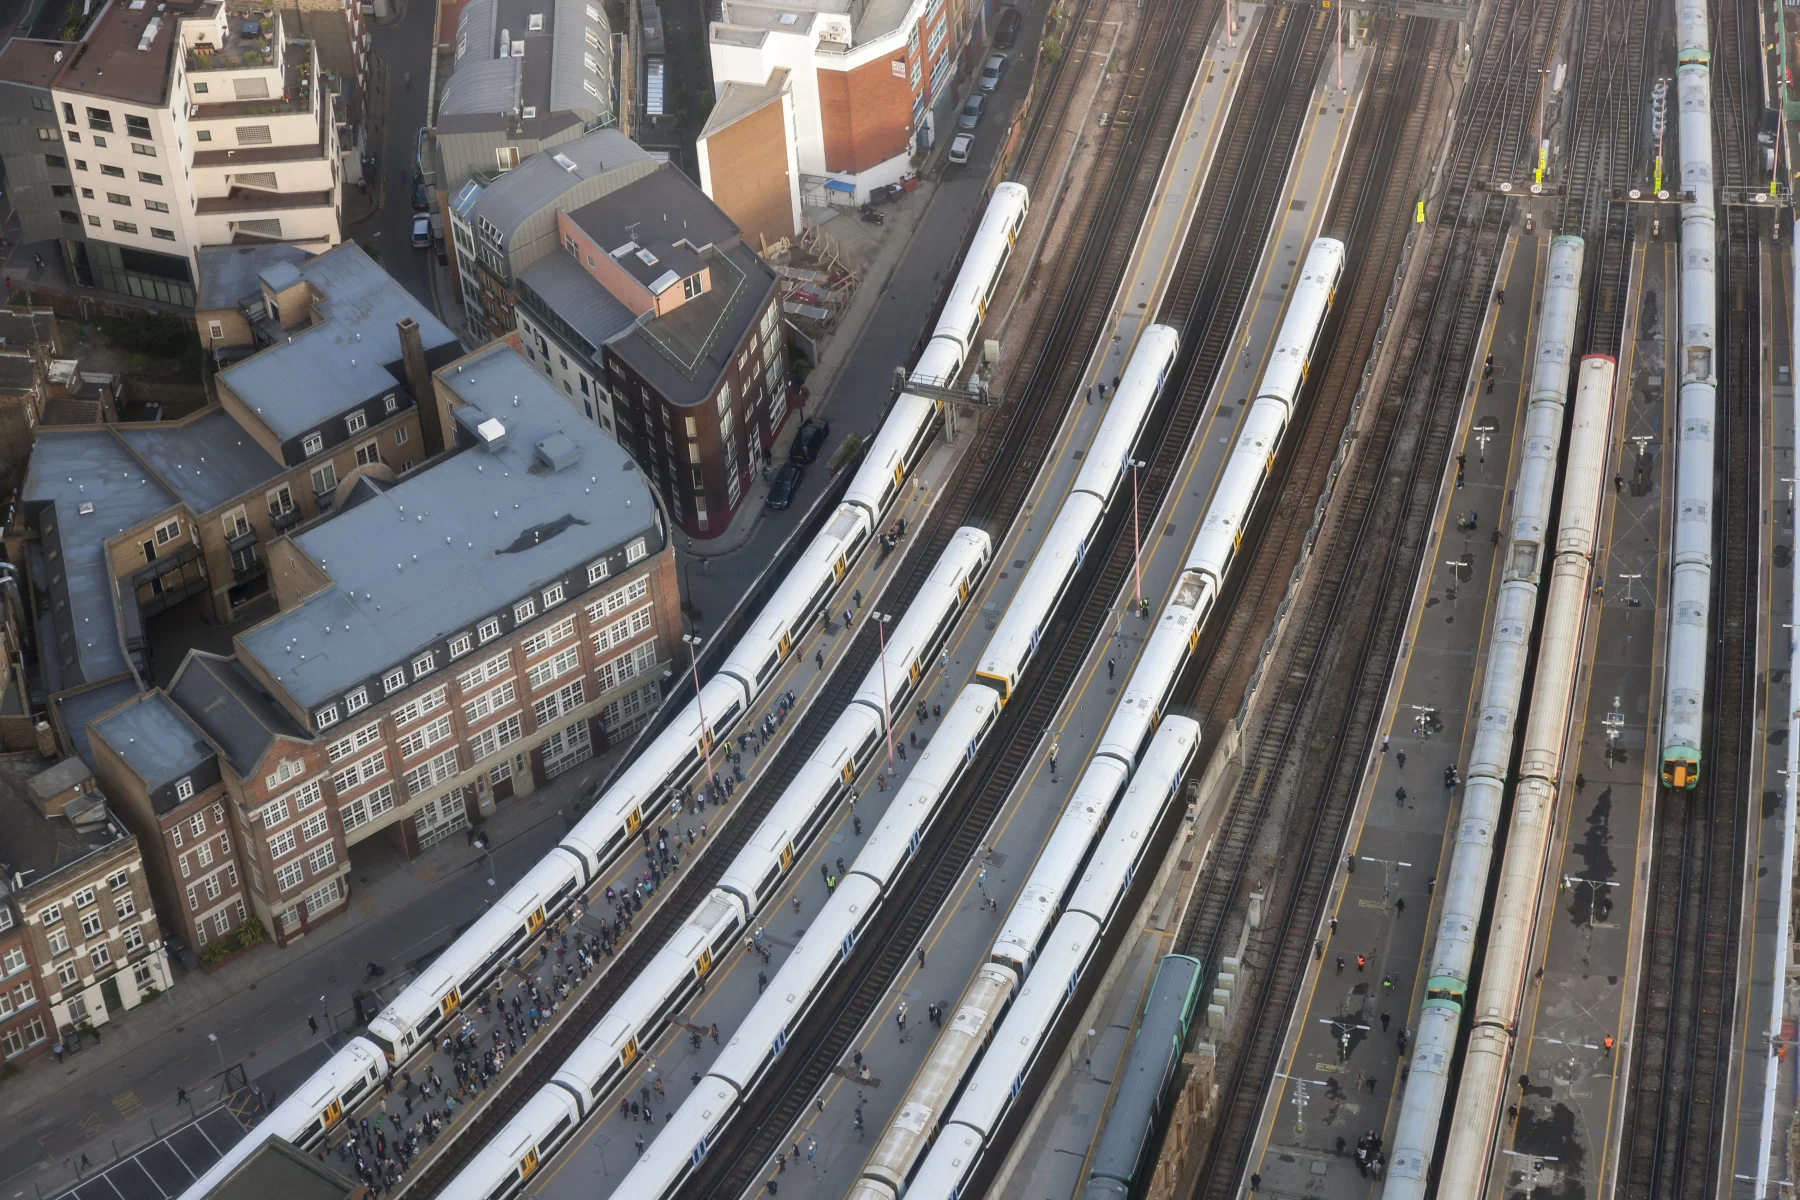 Aerial view of London Bridge Station with trains and commuters on platforms, London, horizontal orientation, England.